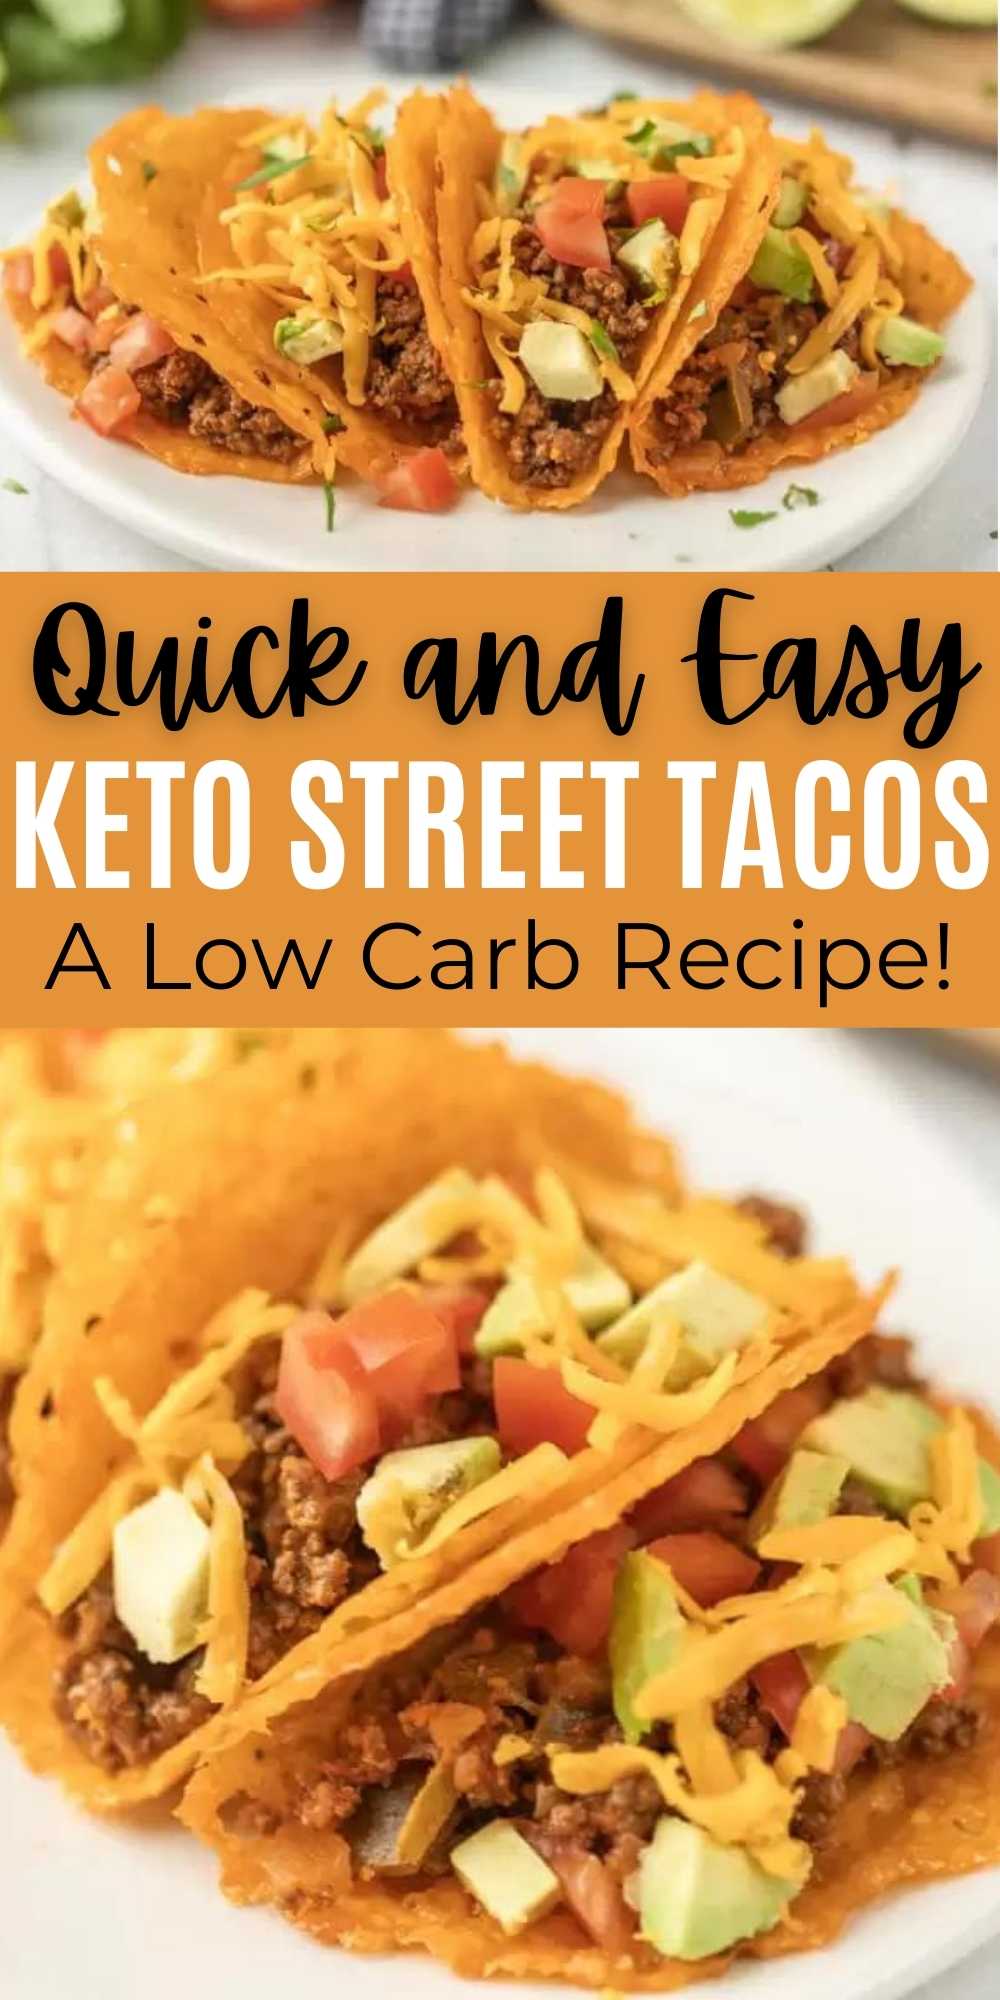 Try Keto Street Tacos Recipe for a low carb dinner idea. Low Carb Street Tacos are packed with flavor. No one will miss the carbs in these tasty keto tacos. These beef street tacos are easy to make and low carb too!  #eatingonadime #tacorecipes #ketorecipes #streettacos 
